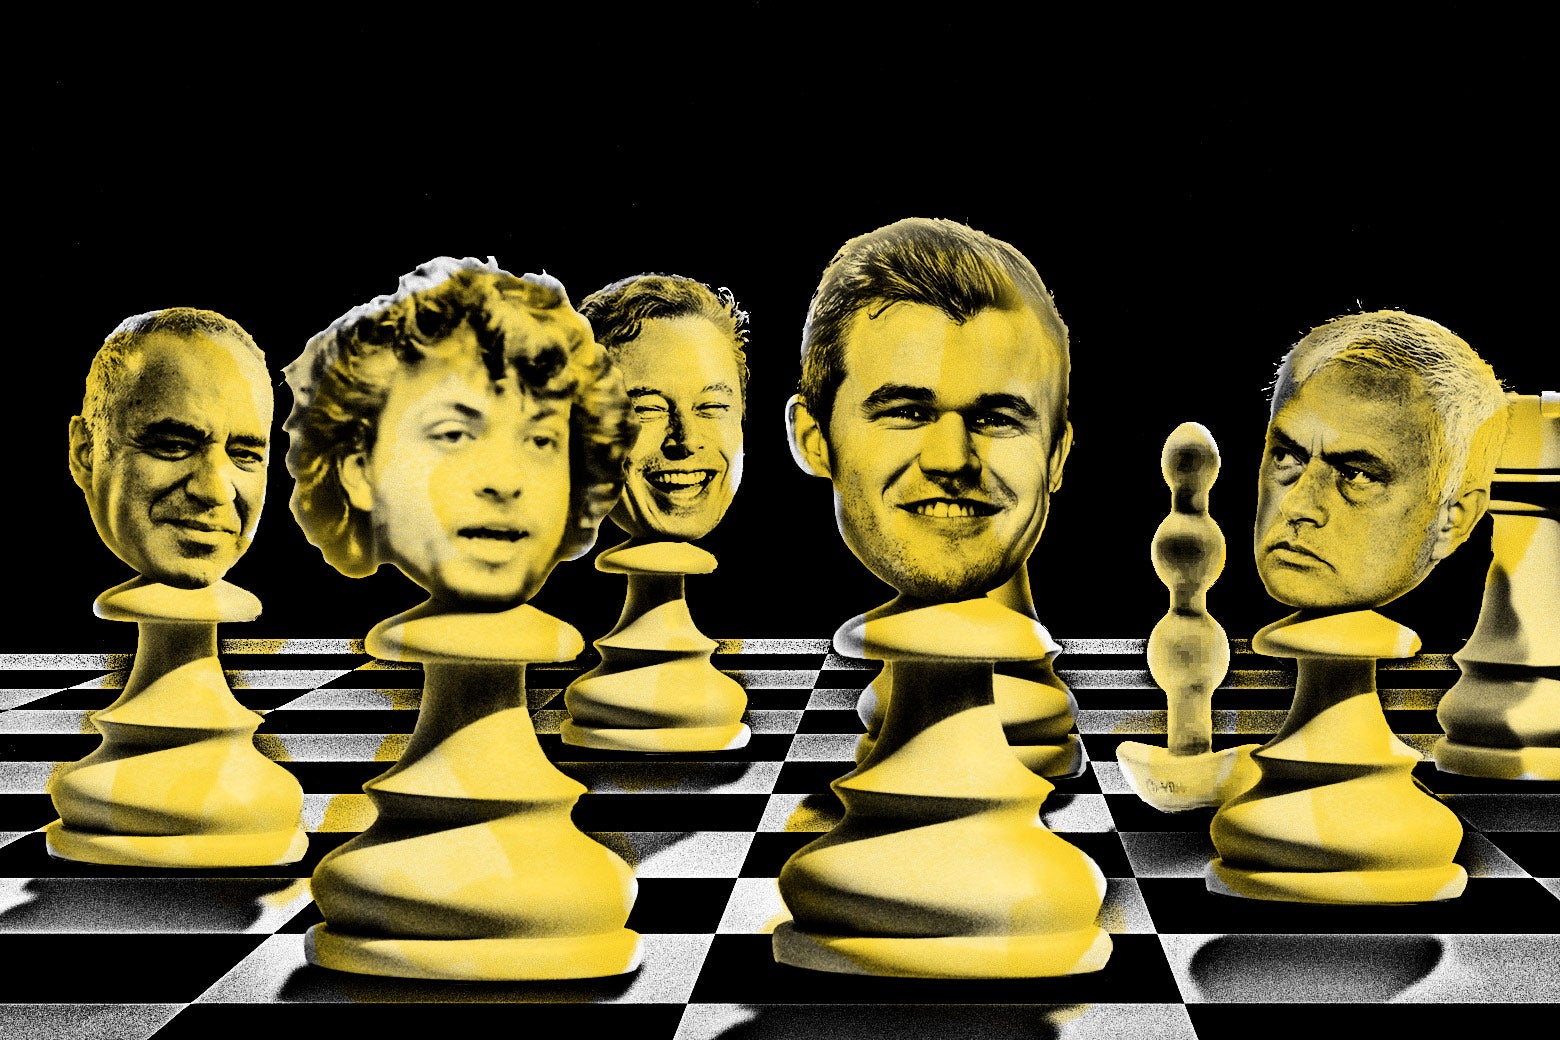 Chess pieces on a board, but the pieces are replaced by Garry Kasparov, Hans Moke Niemann, Elon Musk, Magnus Carlsen, vibrating anal beads, and José Mourinho.